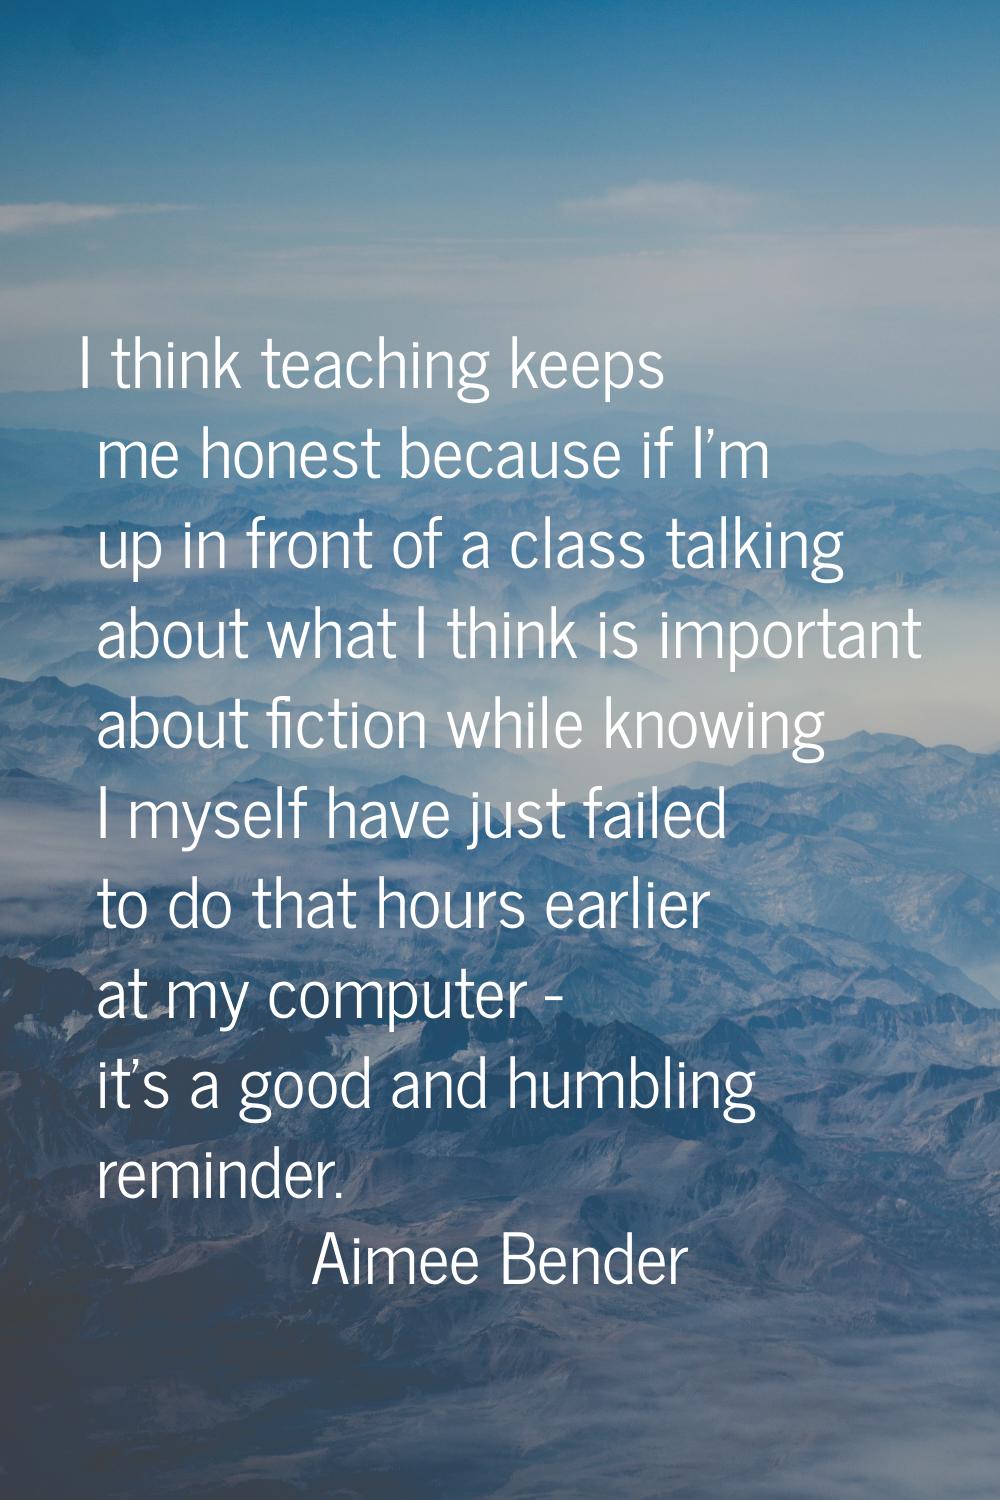 I think teaching keeps me honest because if I'm up in front of a class talking about what I think i